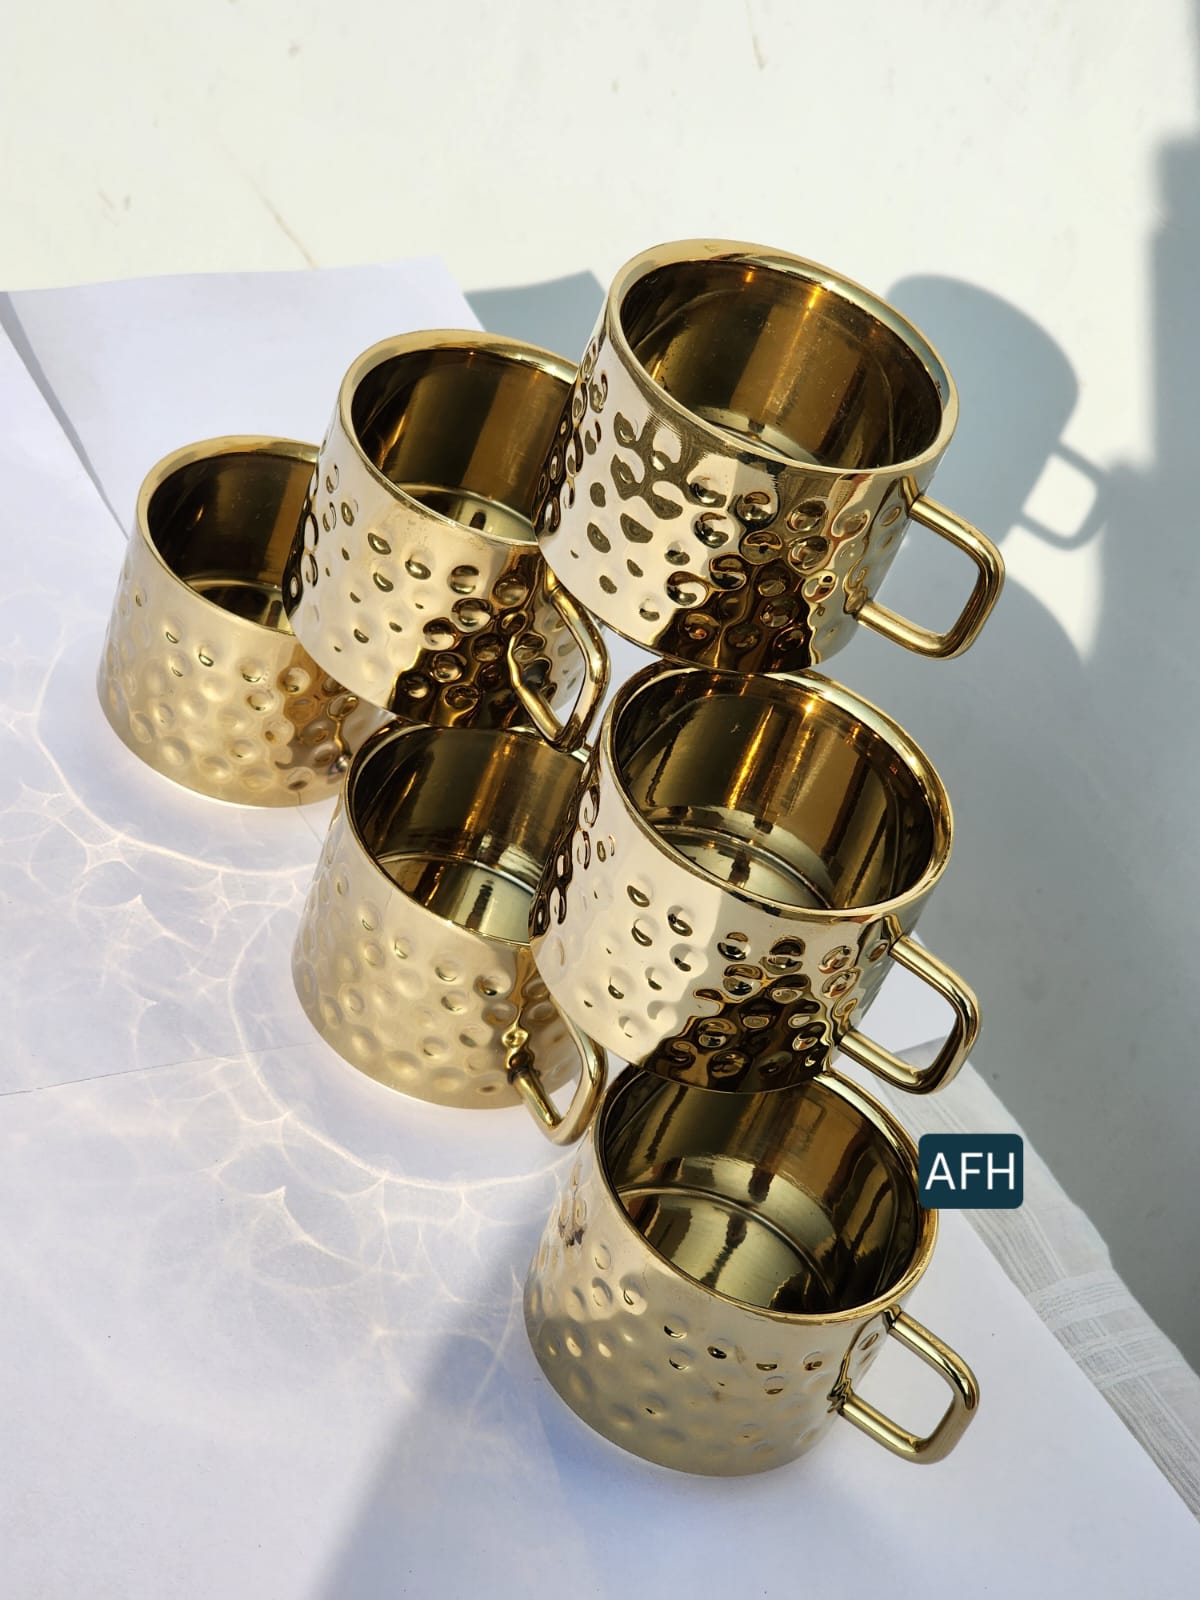 Gold-Plated Tea Cups | Hammered Cups in Stainless Steel (Set of 6)